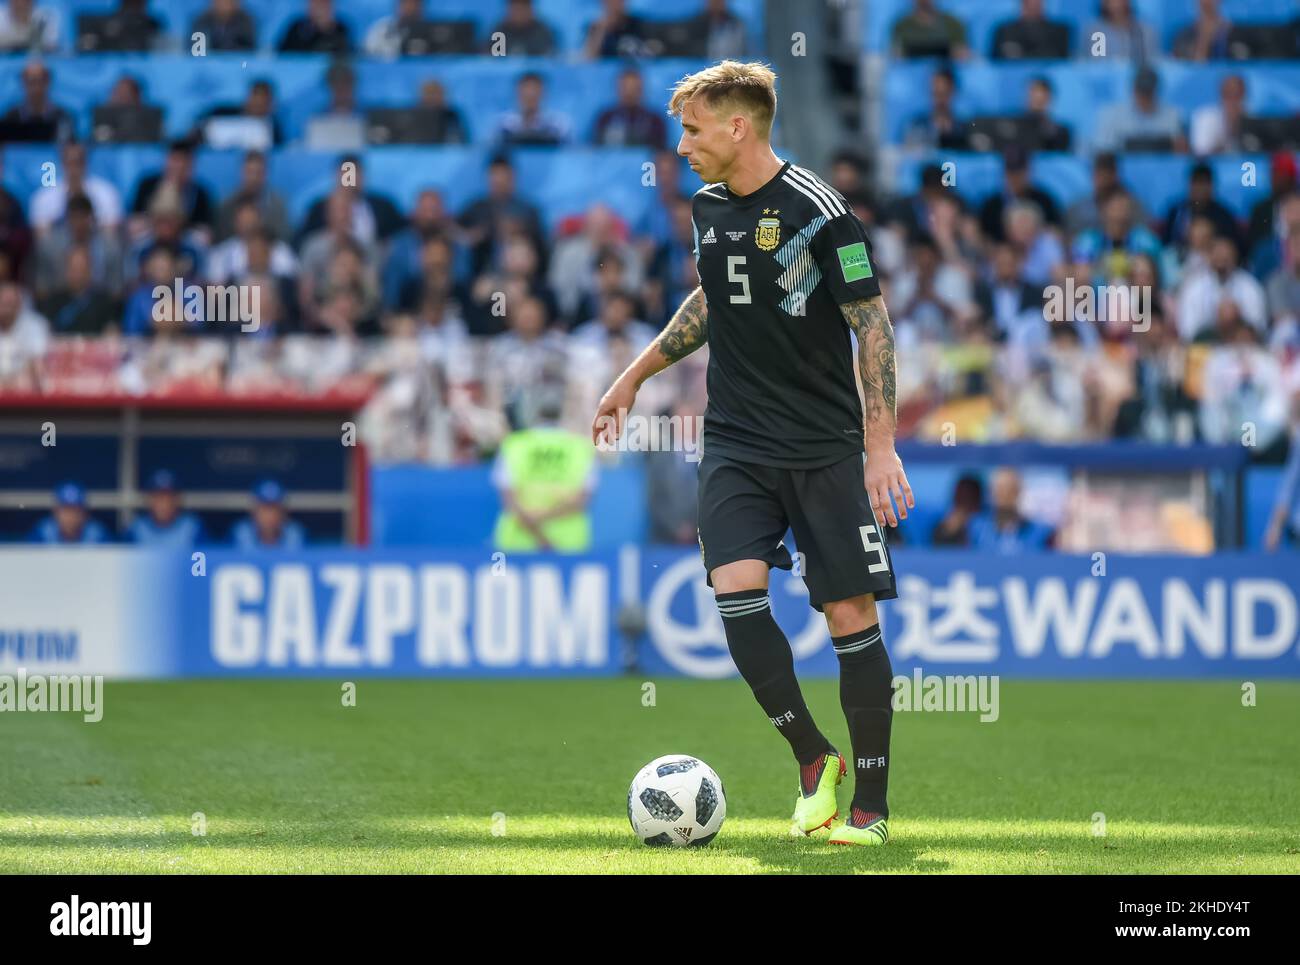 Moscow, Russia - June 16, 2018. Argentina national football team midfielder Lucas Biglia during FIFA World Cup 2018 match Argentina vs Iceland (1-1). Stock Photo